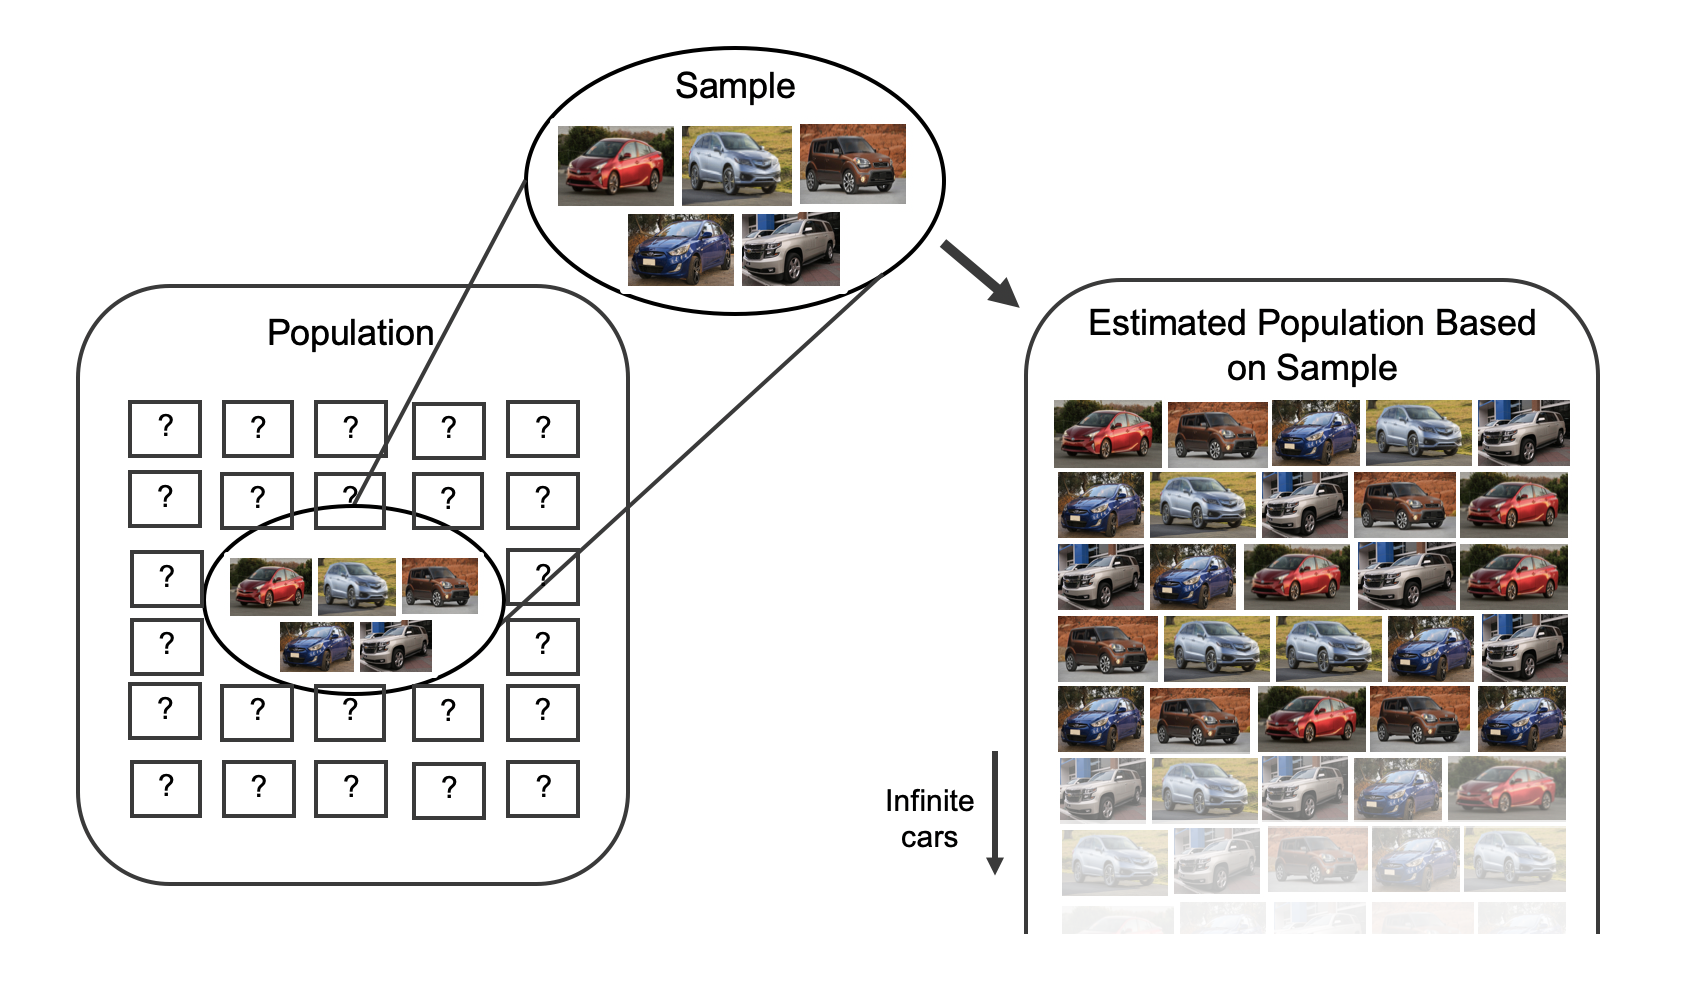 The sample of 5 cars is drawn from a large population with other values (i.e., other car prices) unknown. The sample of five cars is replicated infinitely many times to create a proxy population where the car prices are given by the original dataset in the same relative distribution as measured in the sample.